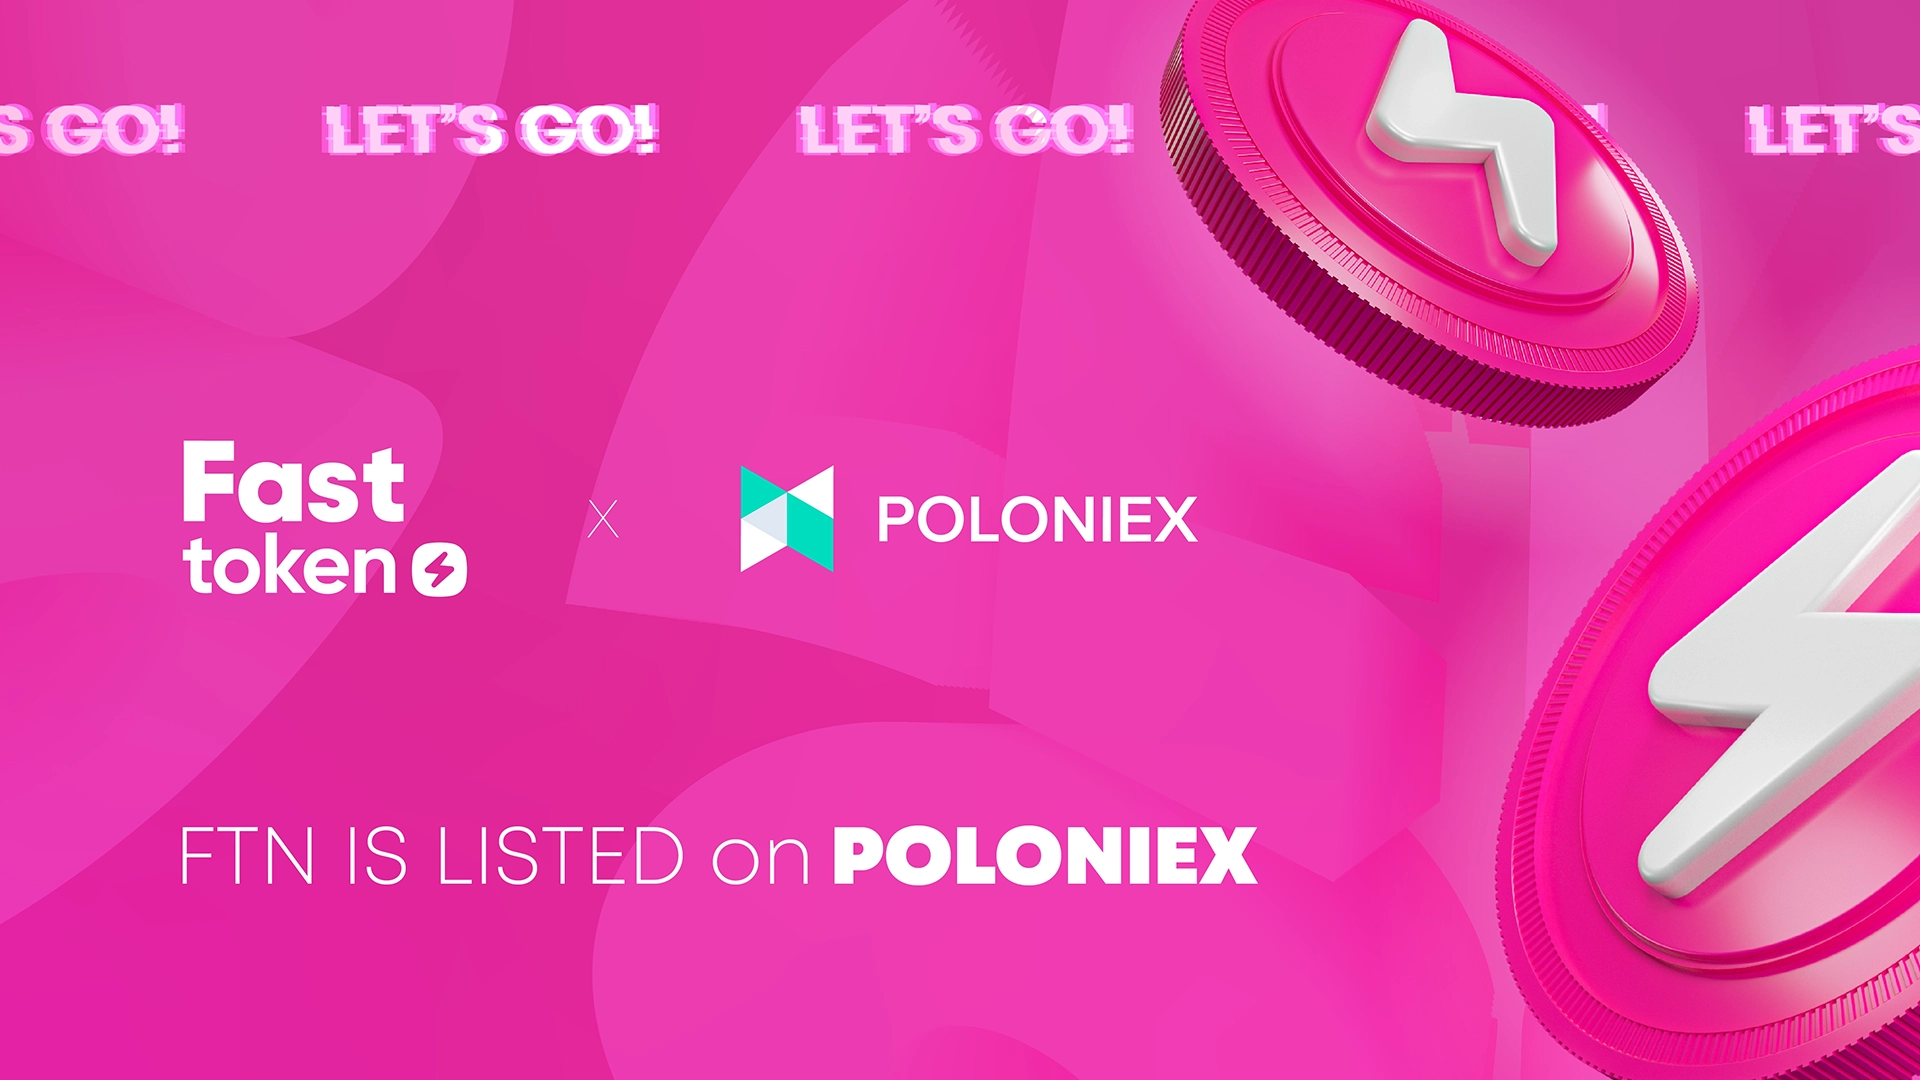 Fasttoken (FTN) is now available on Poloniex